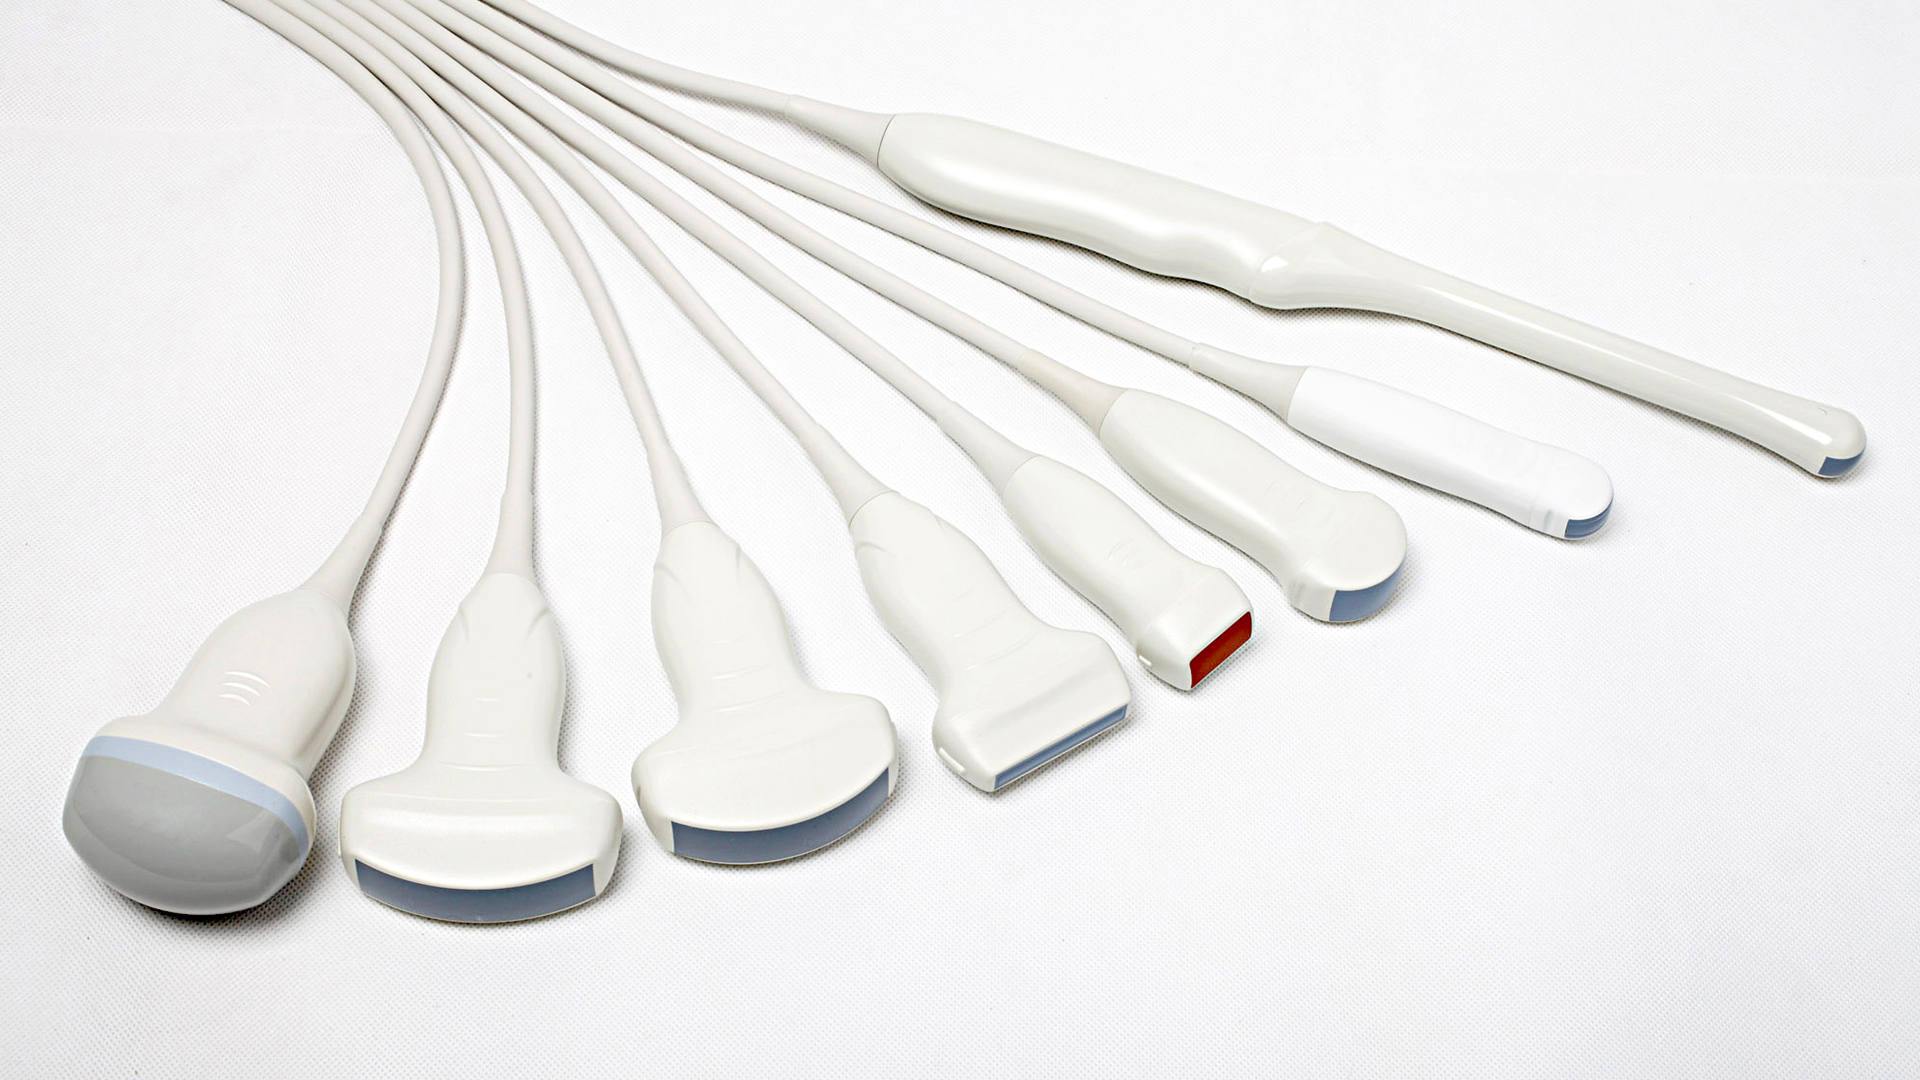 Different types and sizes of ultrasound transducers with their cords attached